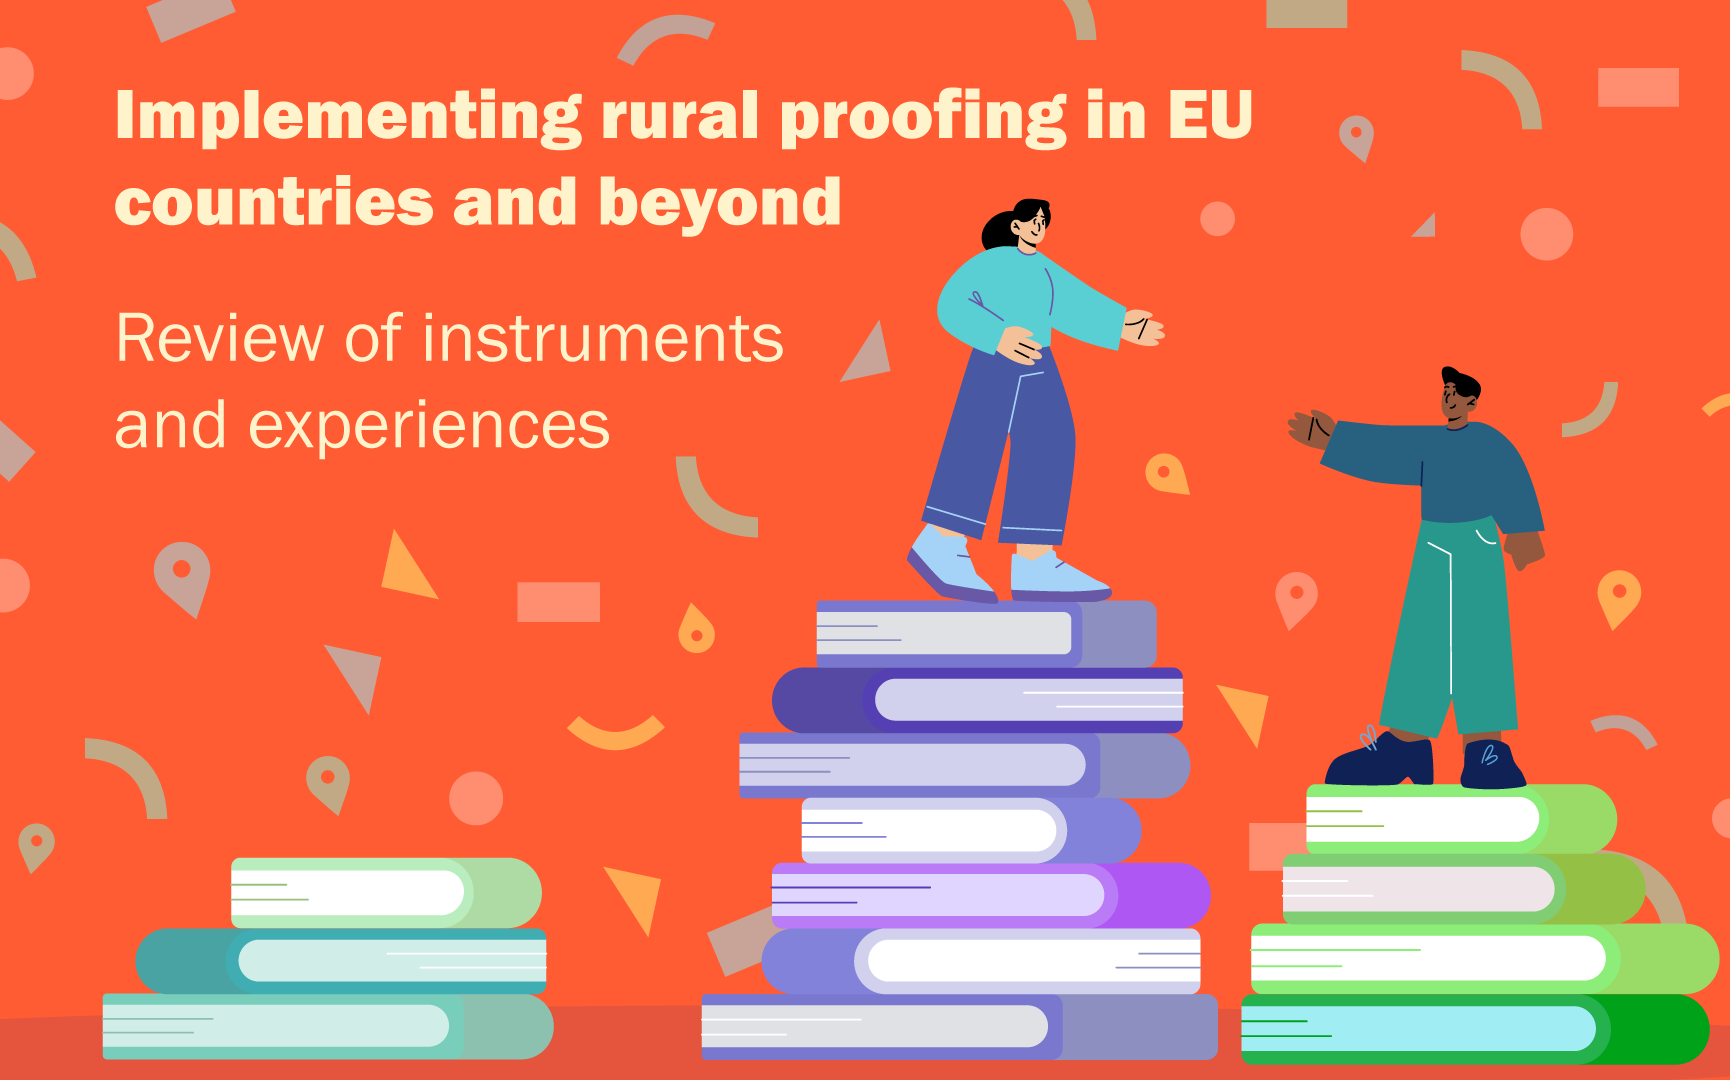 Implementing rural proofing in EU countries and beyond: review of instruments and experiences